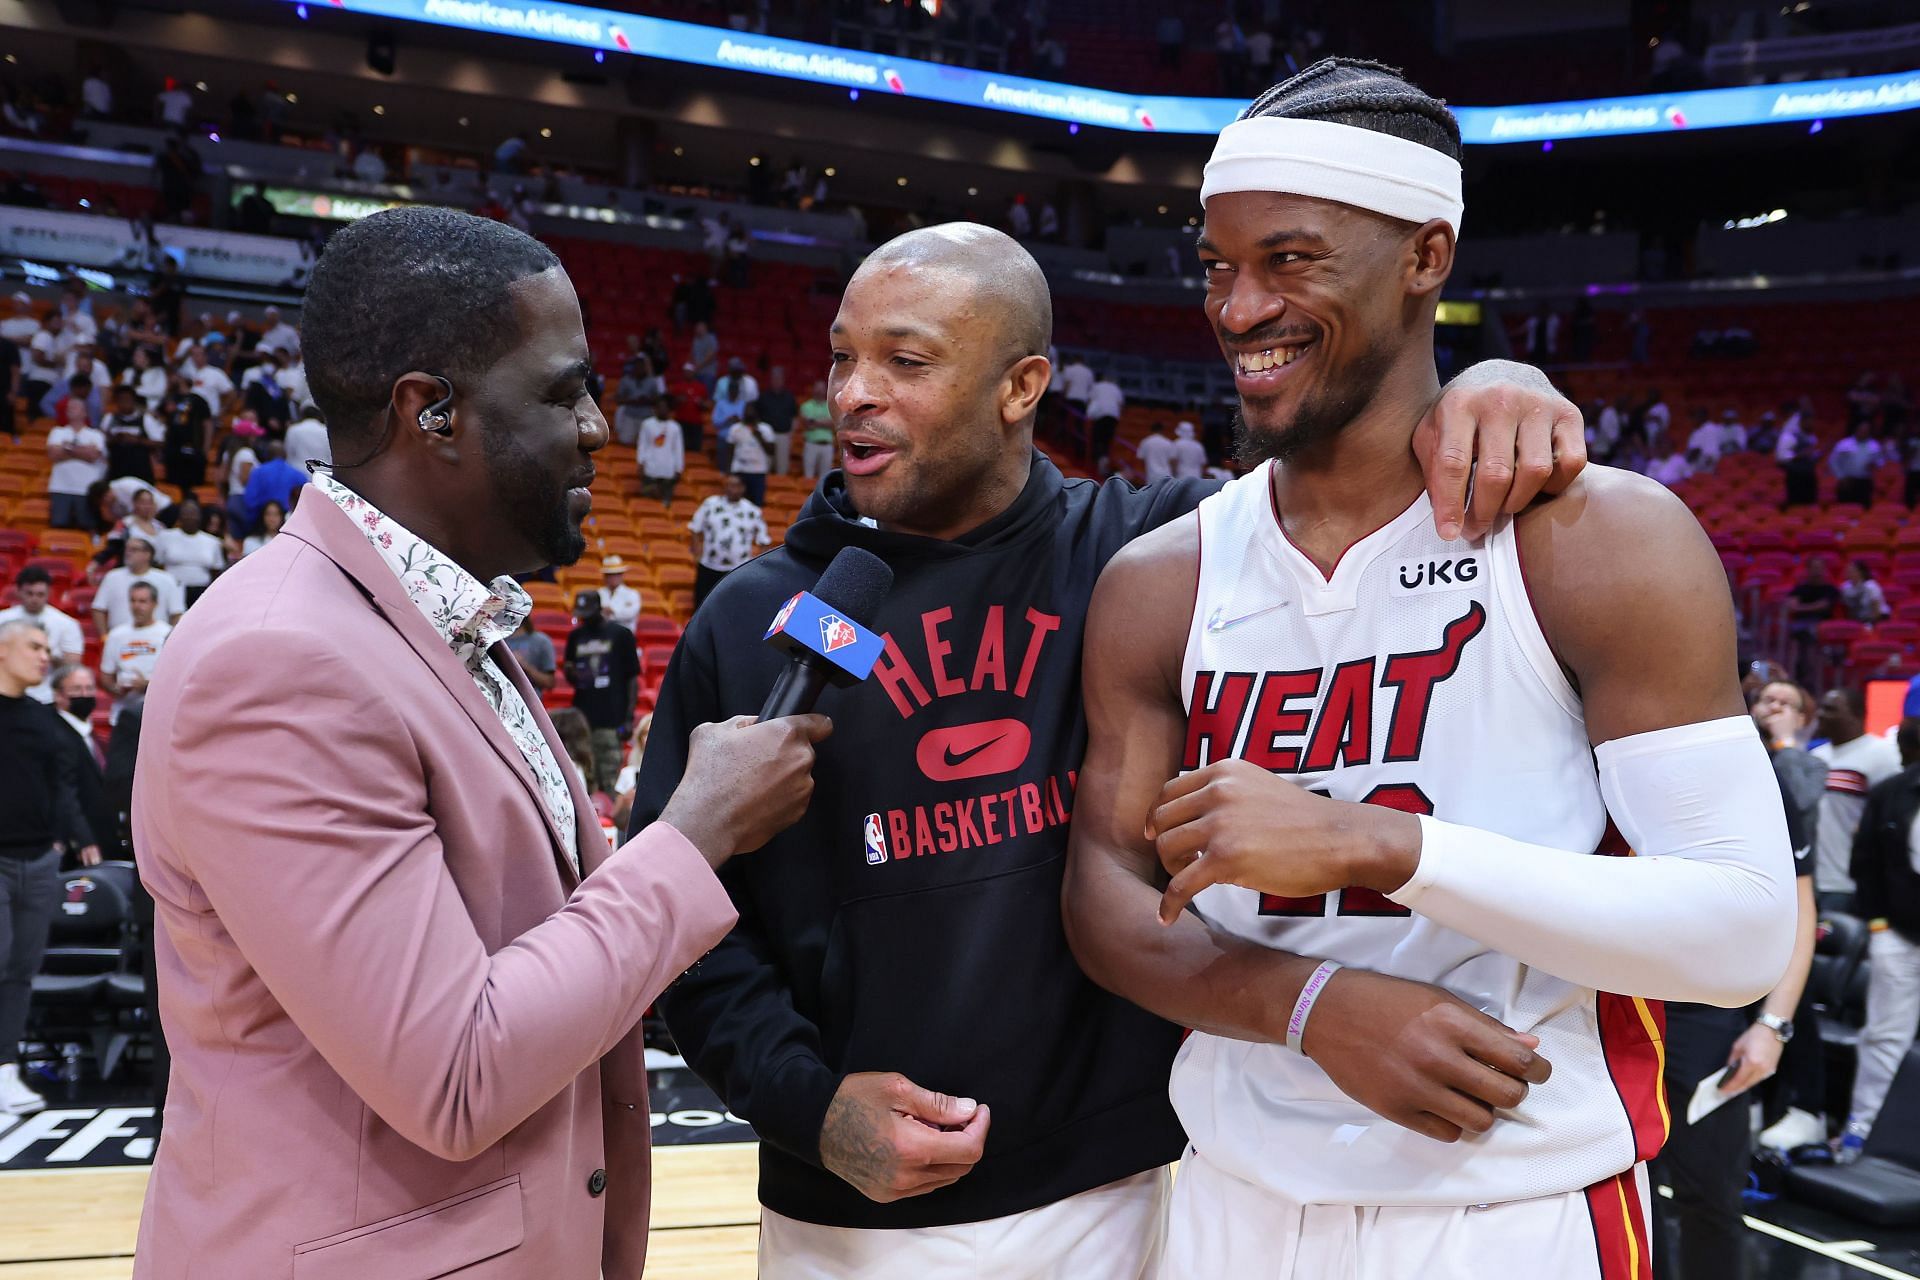 P.J. Tucker #17 and Butler #22 of the Miami Heat are interviewed